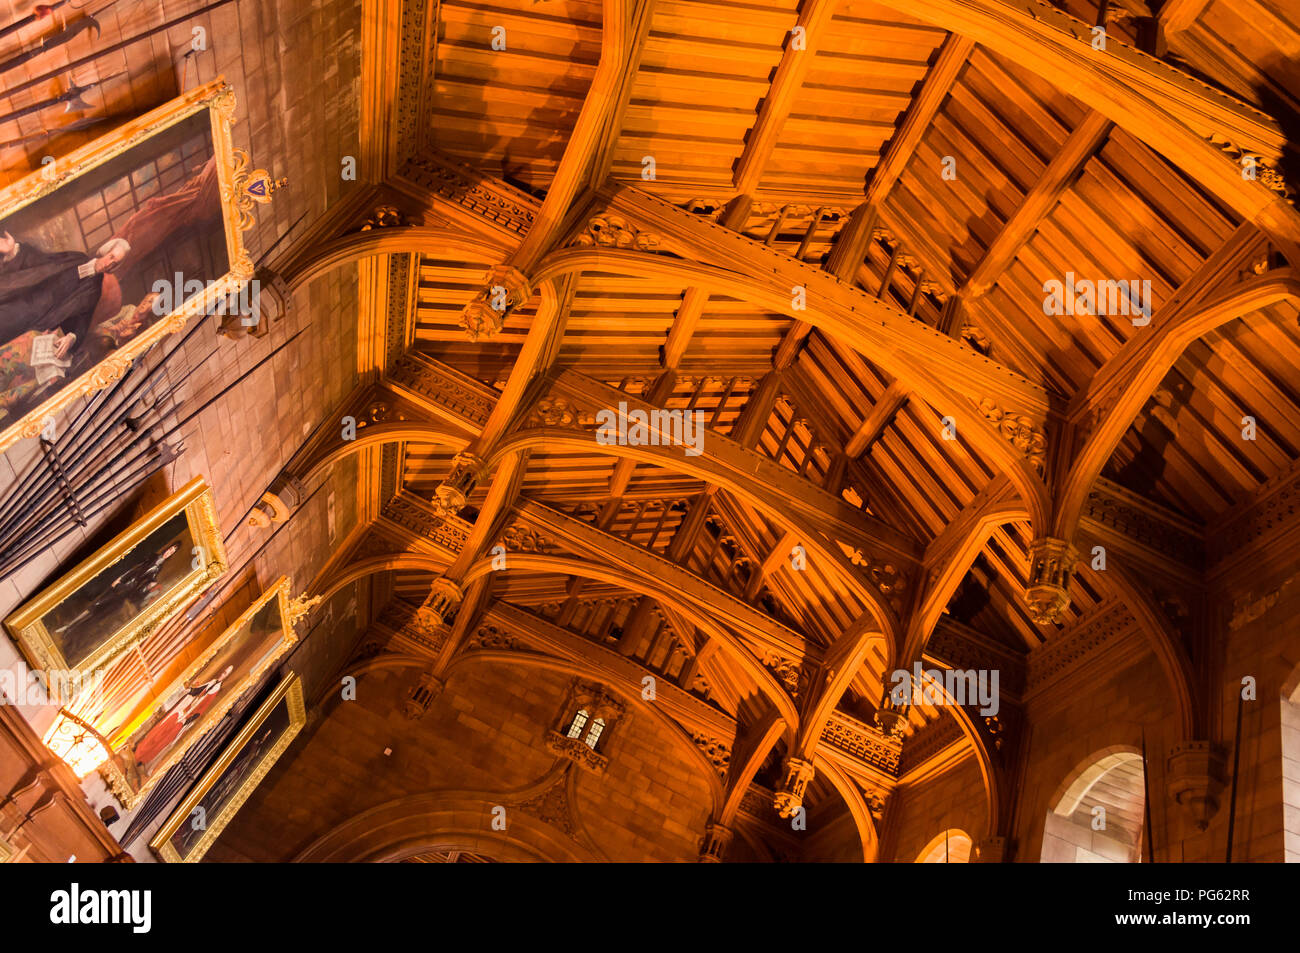 The King's Hall, Victorian era and built from teak wood in Bamburgh Castle, Northumberland, England, UK Stock Photo